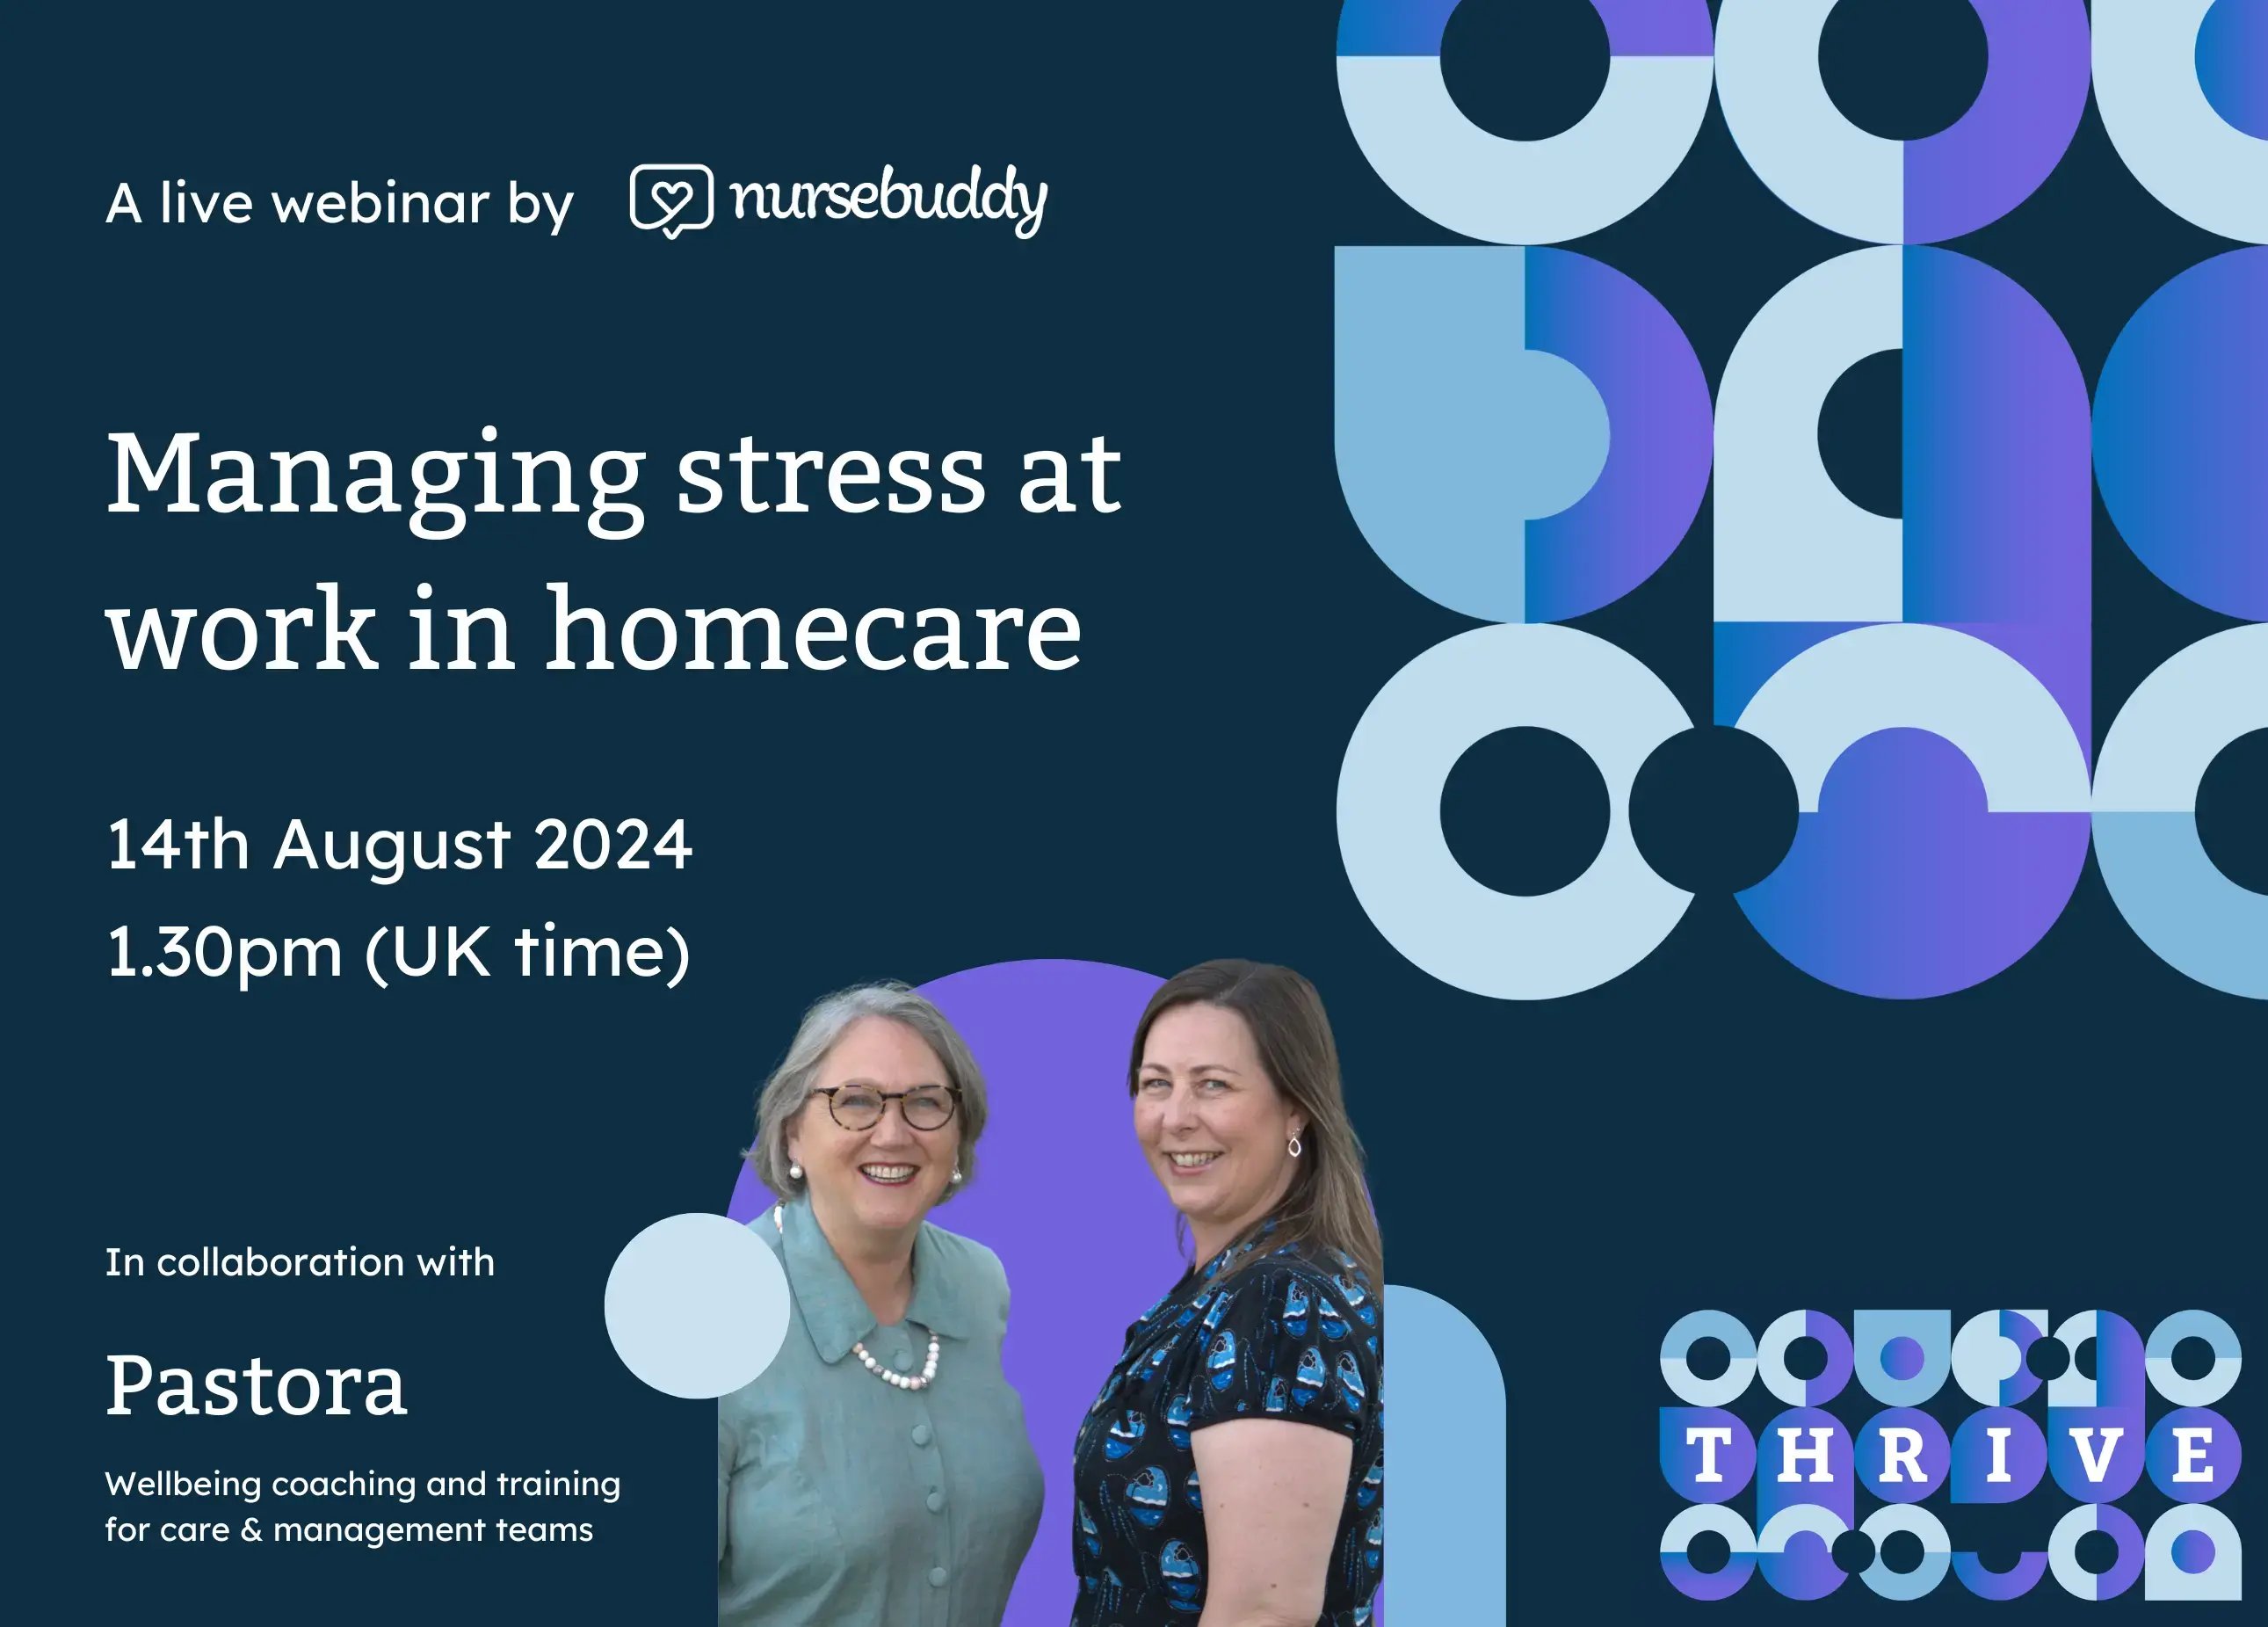 Managing stress at work in homecare, a live webinar from Nursebuddy with Pastora